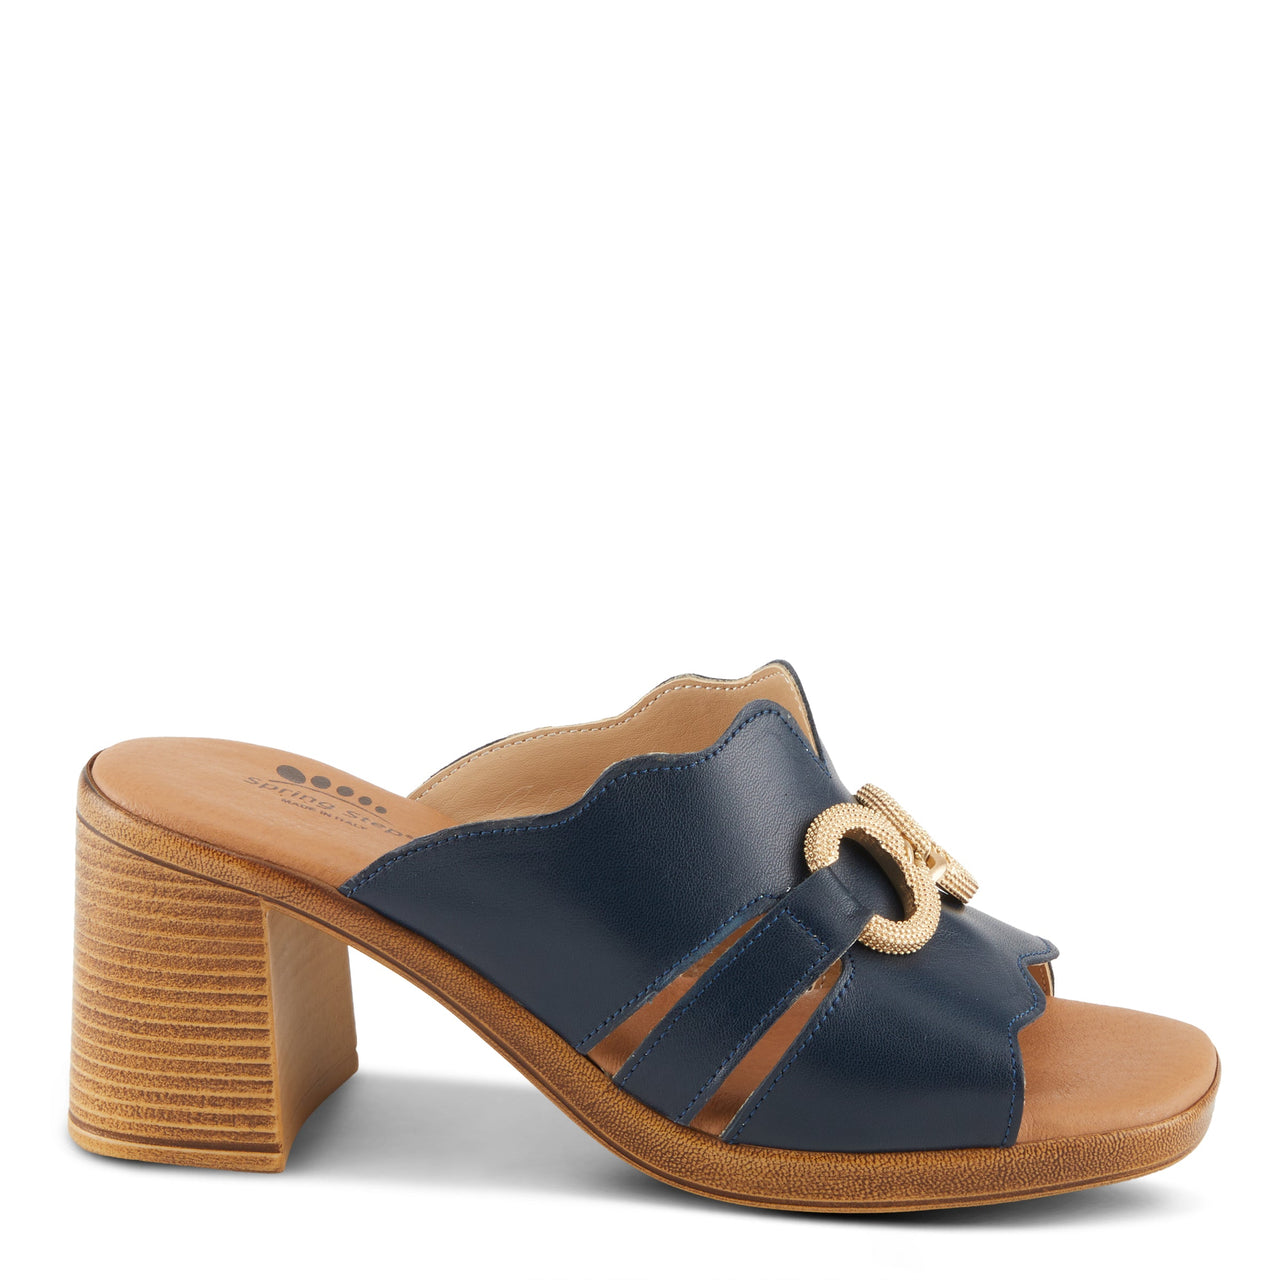  Sophisticated Spring Step Modica Sandals in charcoal leather with stacked heels